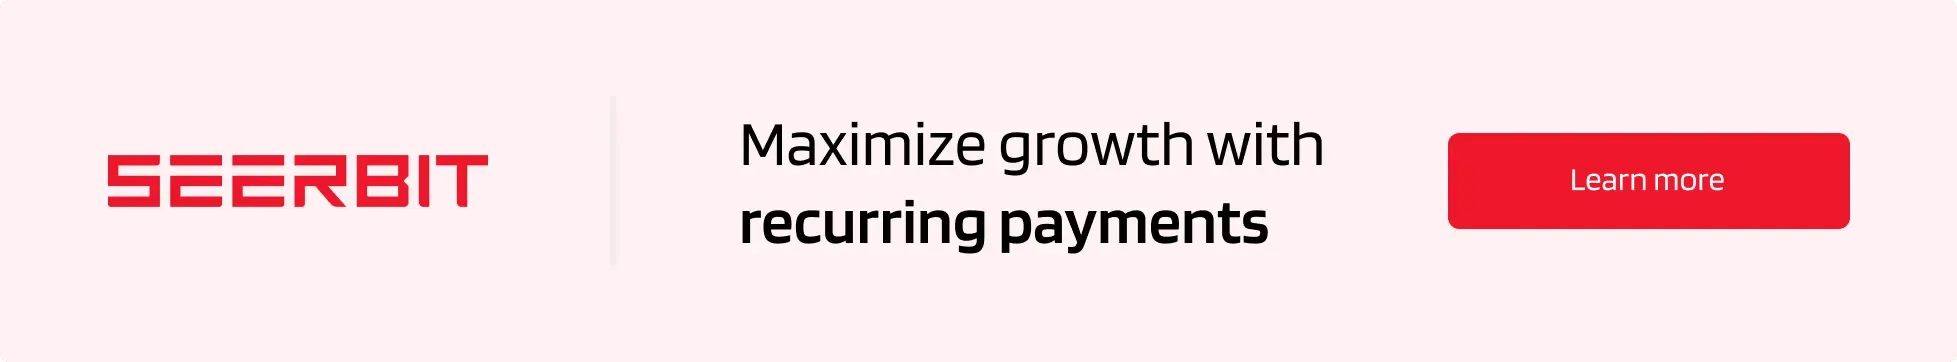 Get started with recurring payments